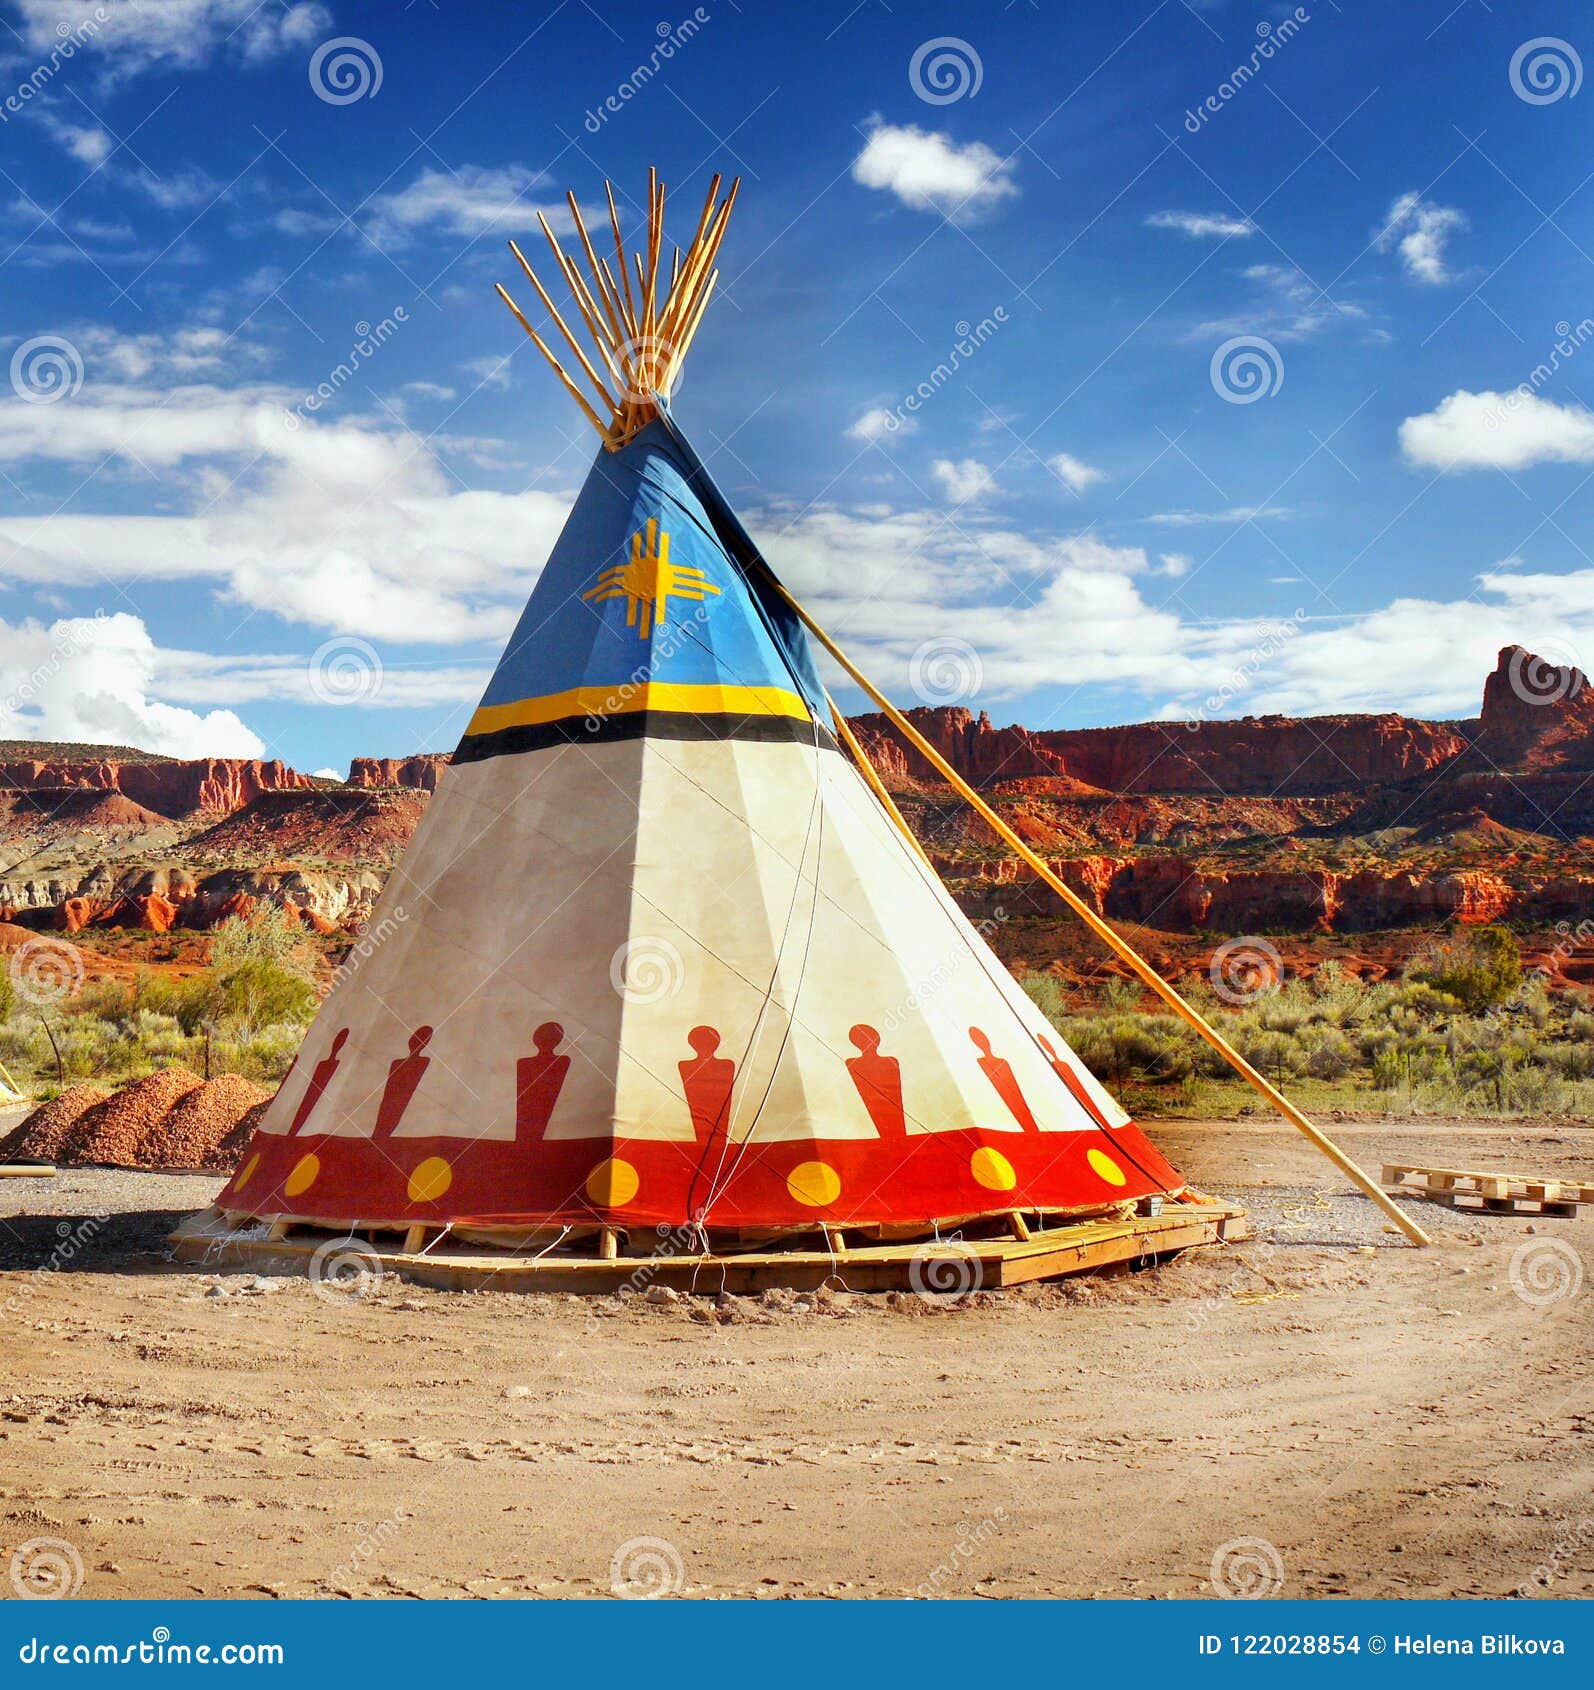 Albums 104+ Images tribe whose flag features a circle of teepees on a red background Stunning